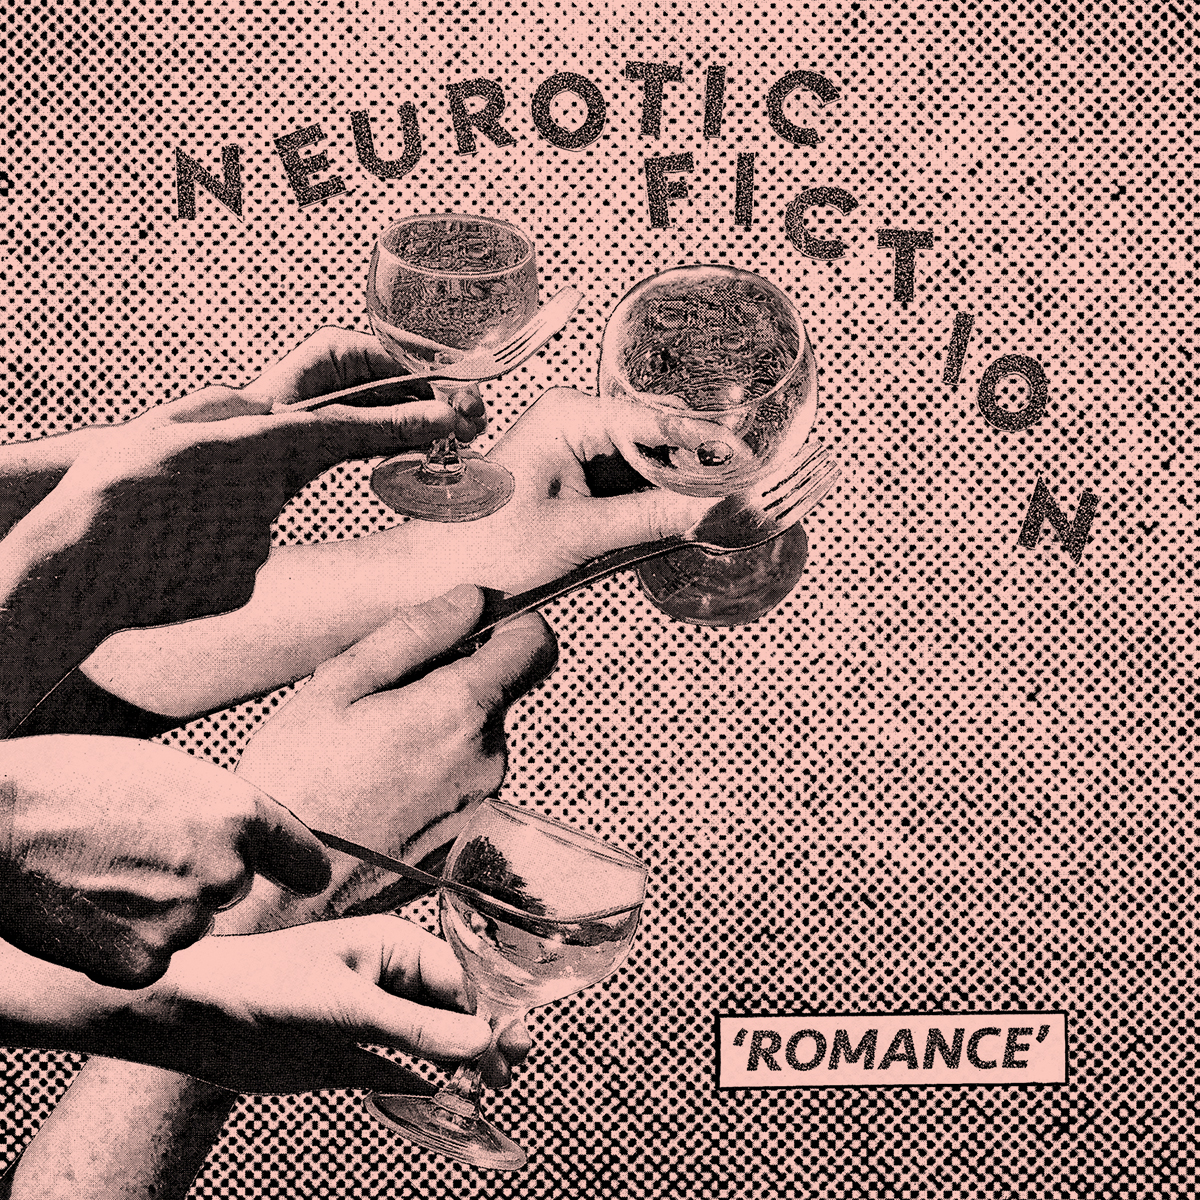 neurotic fiction romance, collage showing several hands holding out drinks in glasses